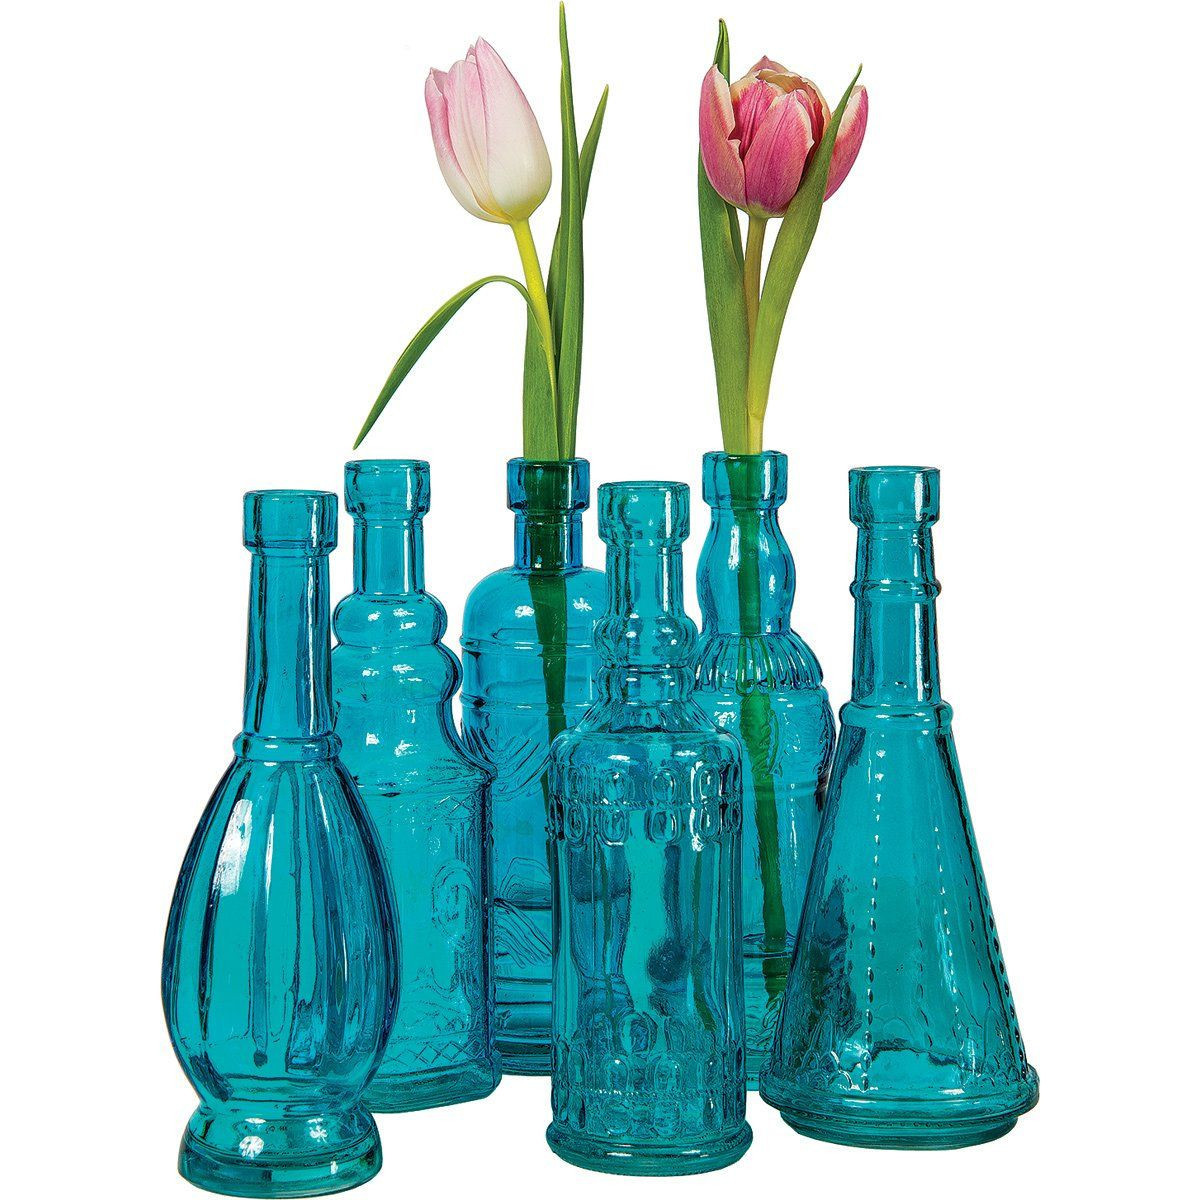 18 Stylish Vintage Waterford Vase 2024 free download vintage waterford vase of small crystal vase photos waterford crystal vase 225 00 small 65 regarding small crystal vase photograph luna bazaar small vintage glass bottle set 7 inch turquoise